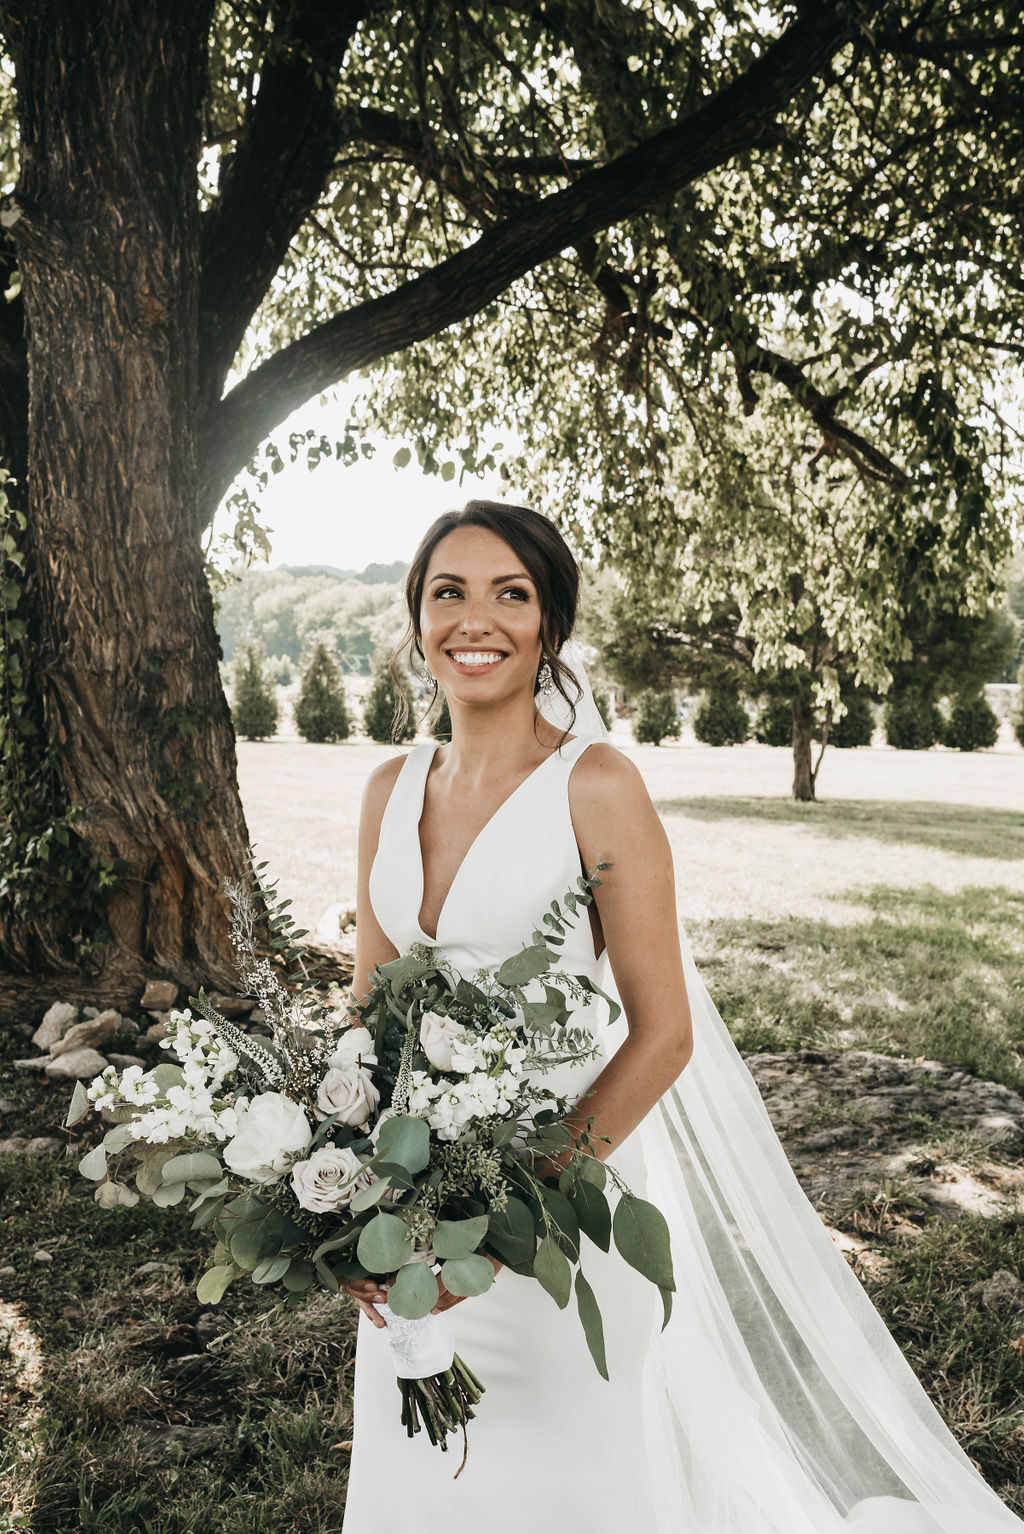 Bridal portrait with white and greenery wedding bouquet